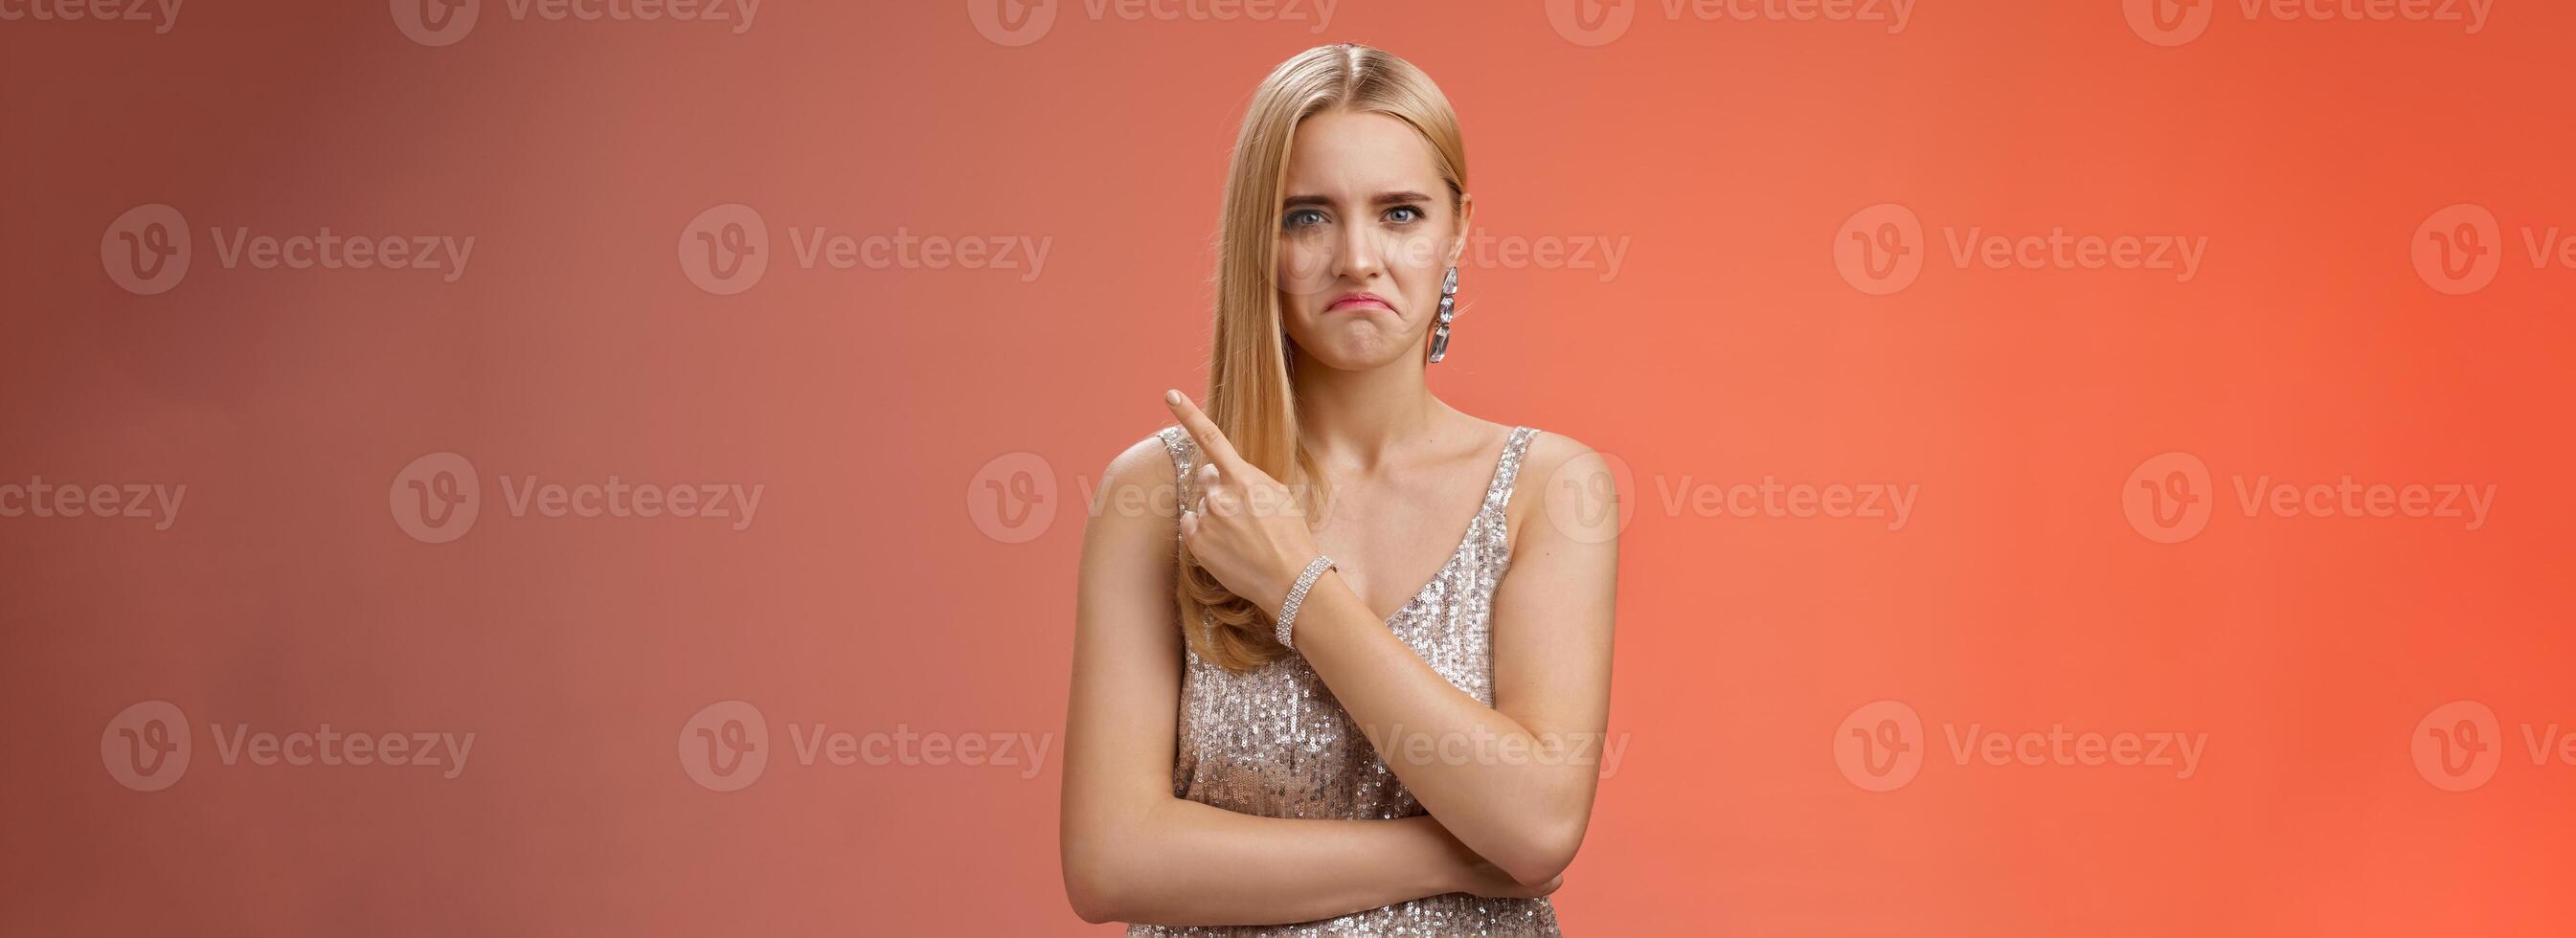 Jealous displeased angry young revengeful blond ex-girlfriend in luxurious silver shiny dress frowning pouting pointing upper right corner displeased pissed standing fed up upset red background photo